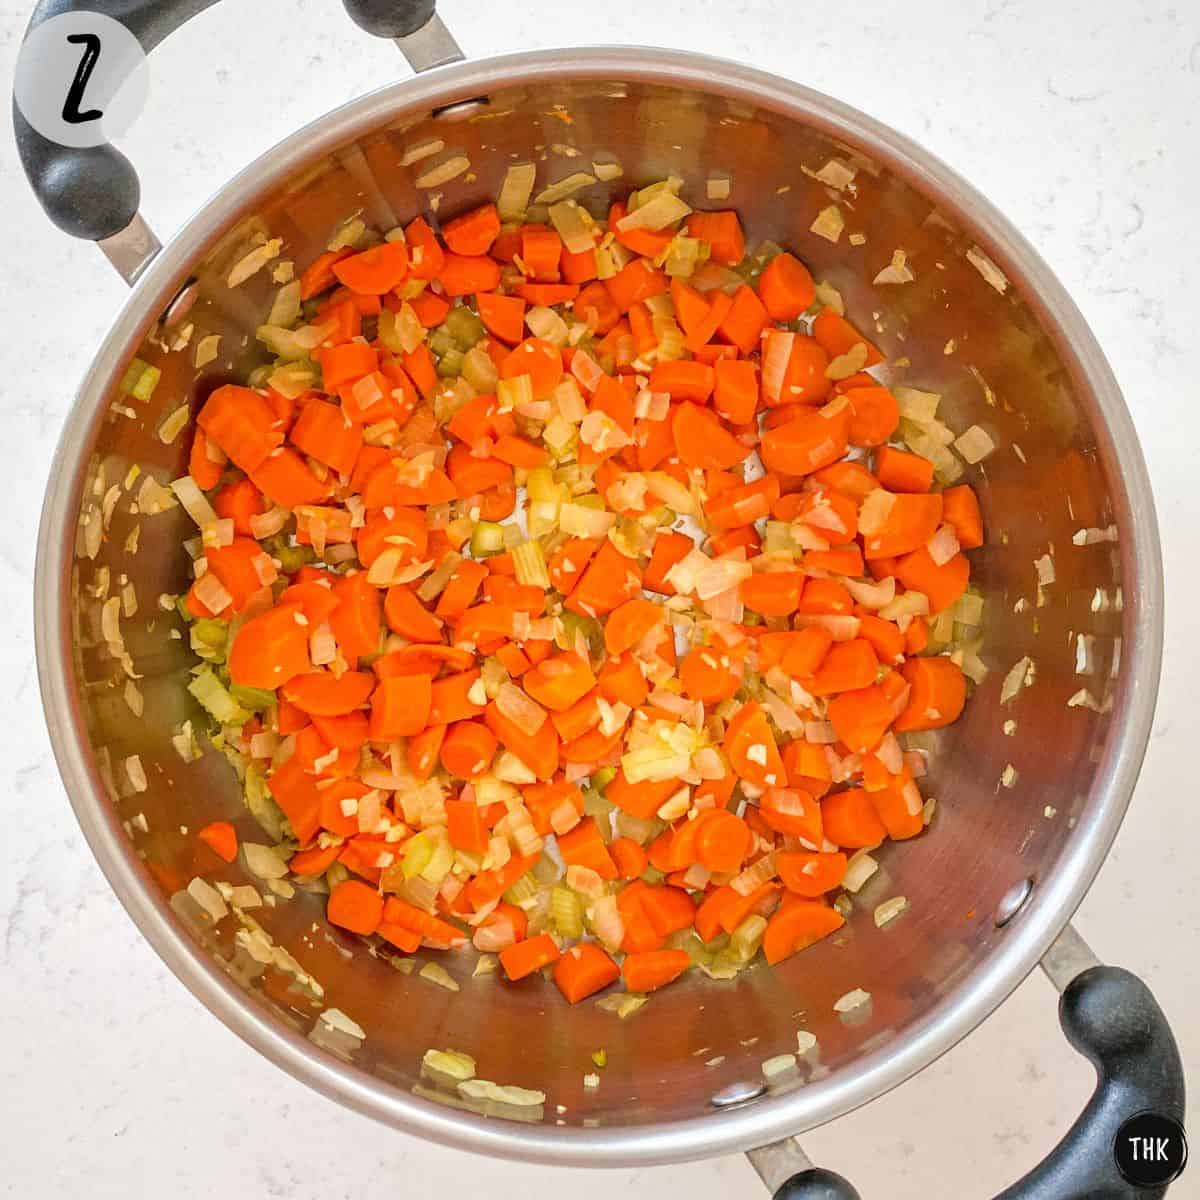 Pot with sauteed onion, carrot, celery and garlic.